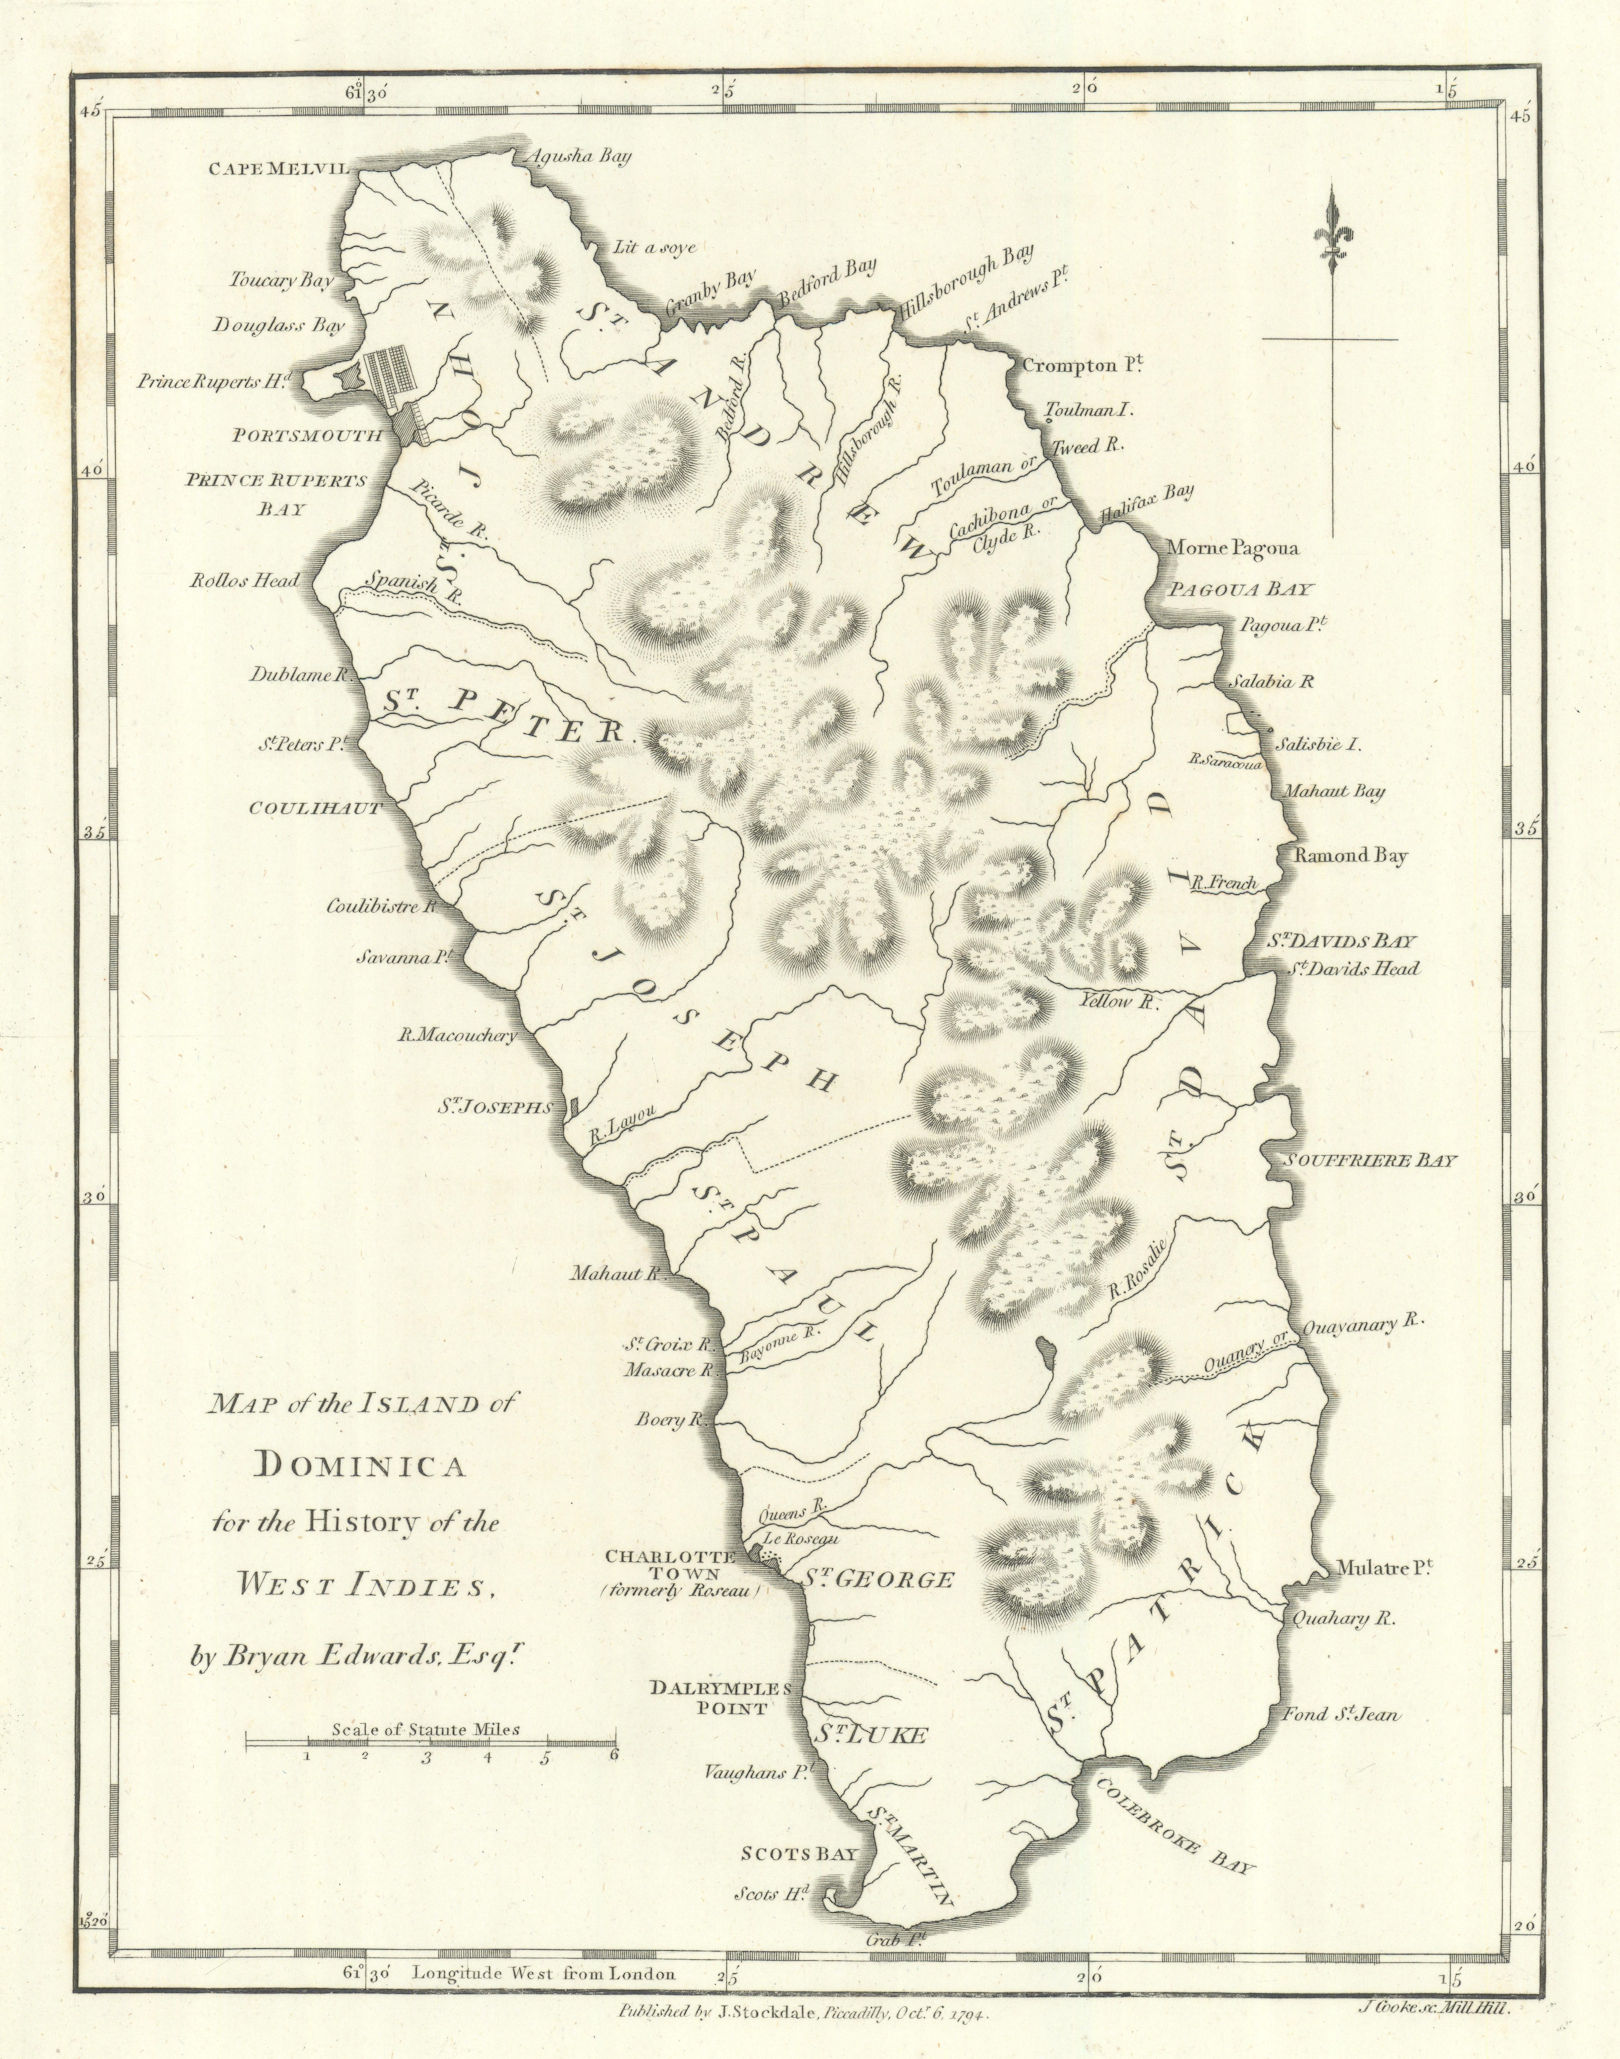 Associate Product 'Map of the Island of DOMINICA' by Bryan EDWARDS. West Indies. Caribbean 1794